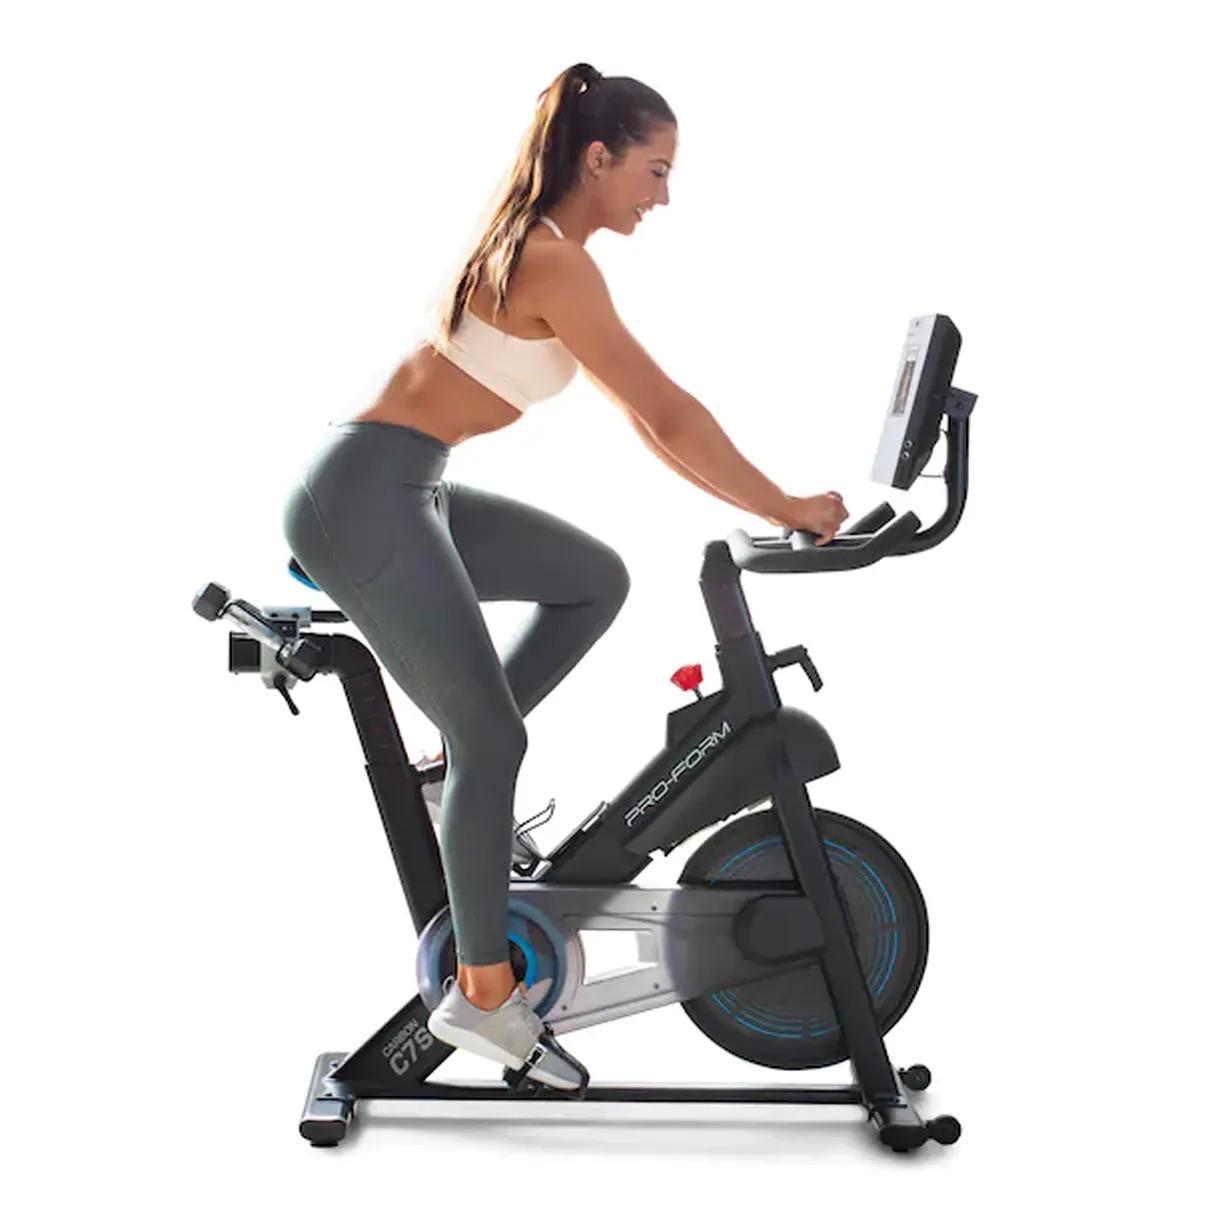 ProForm Power C7L Magnetic Spin Exercise Bike for $449